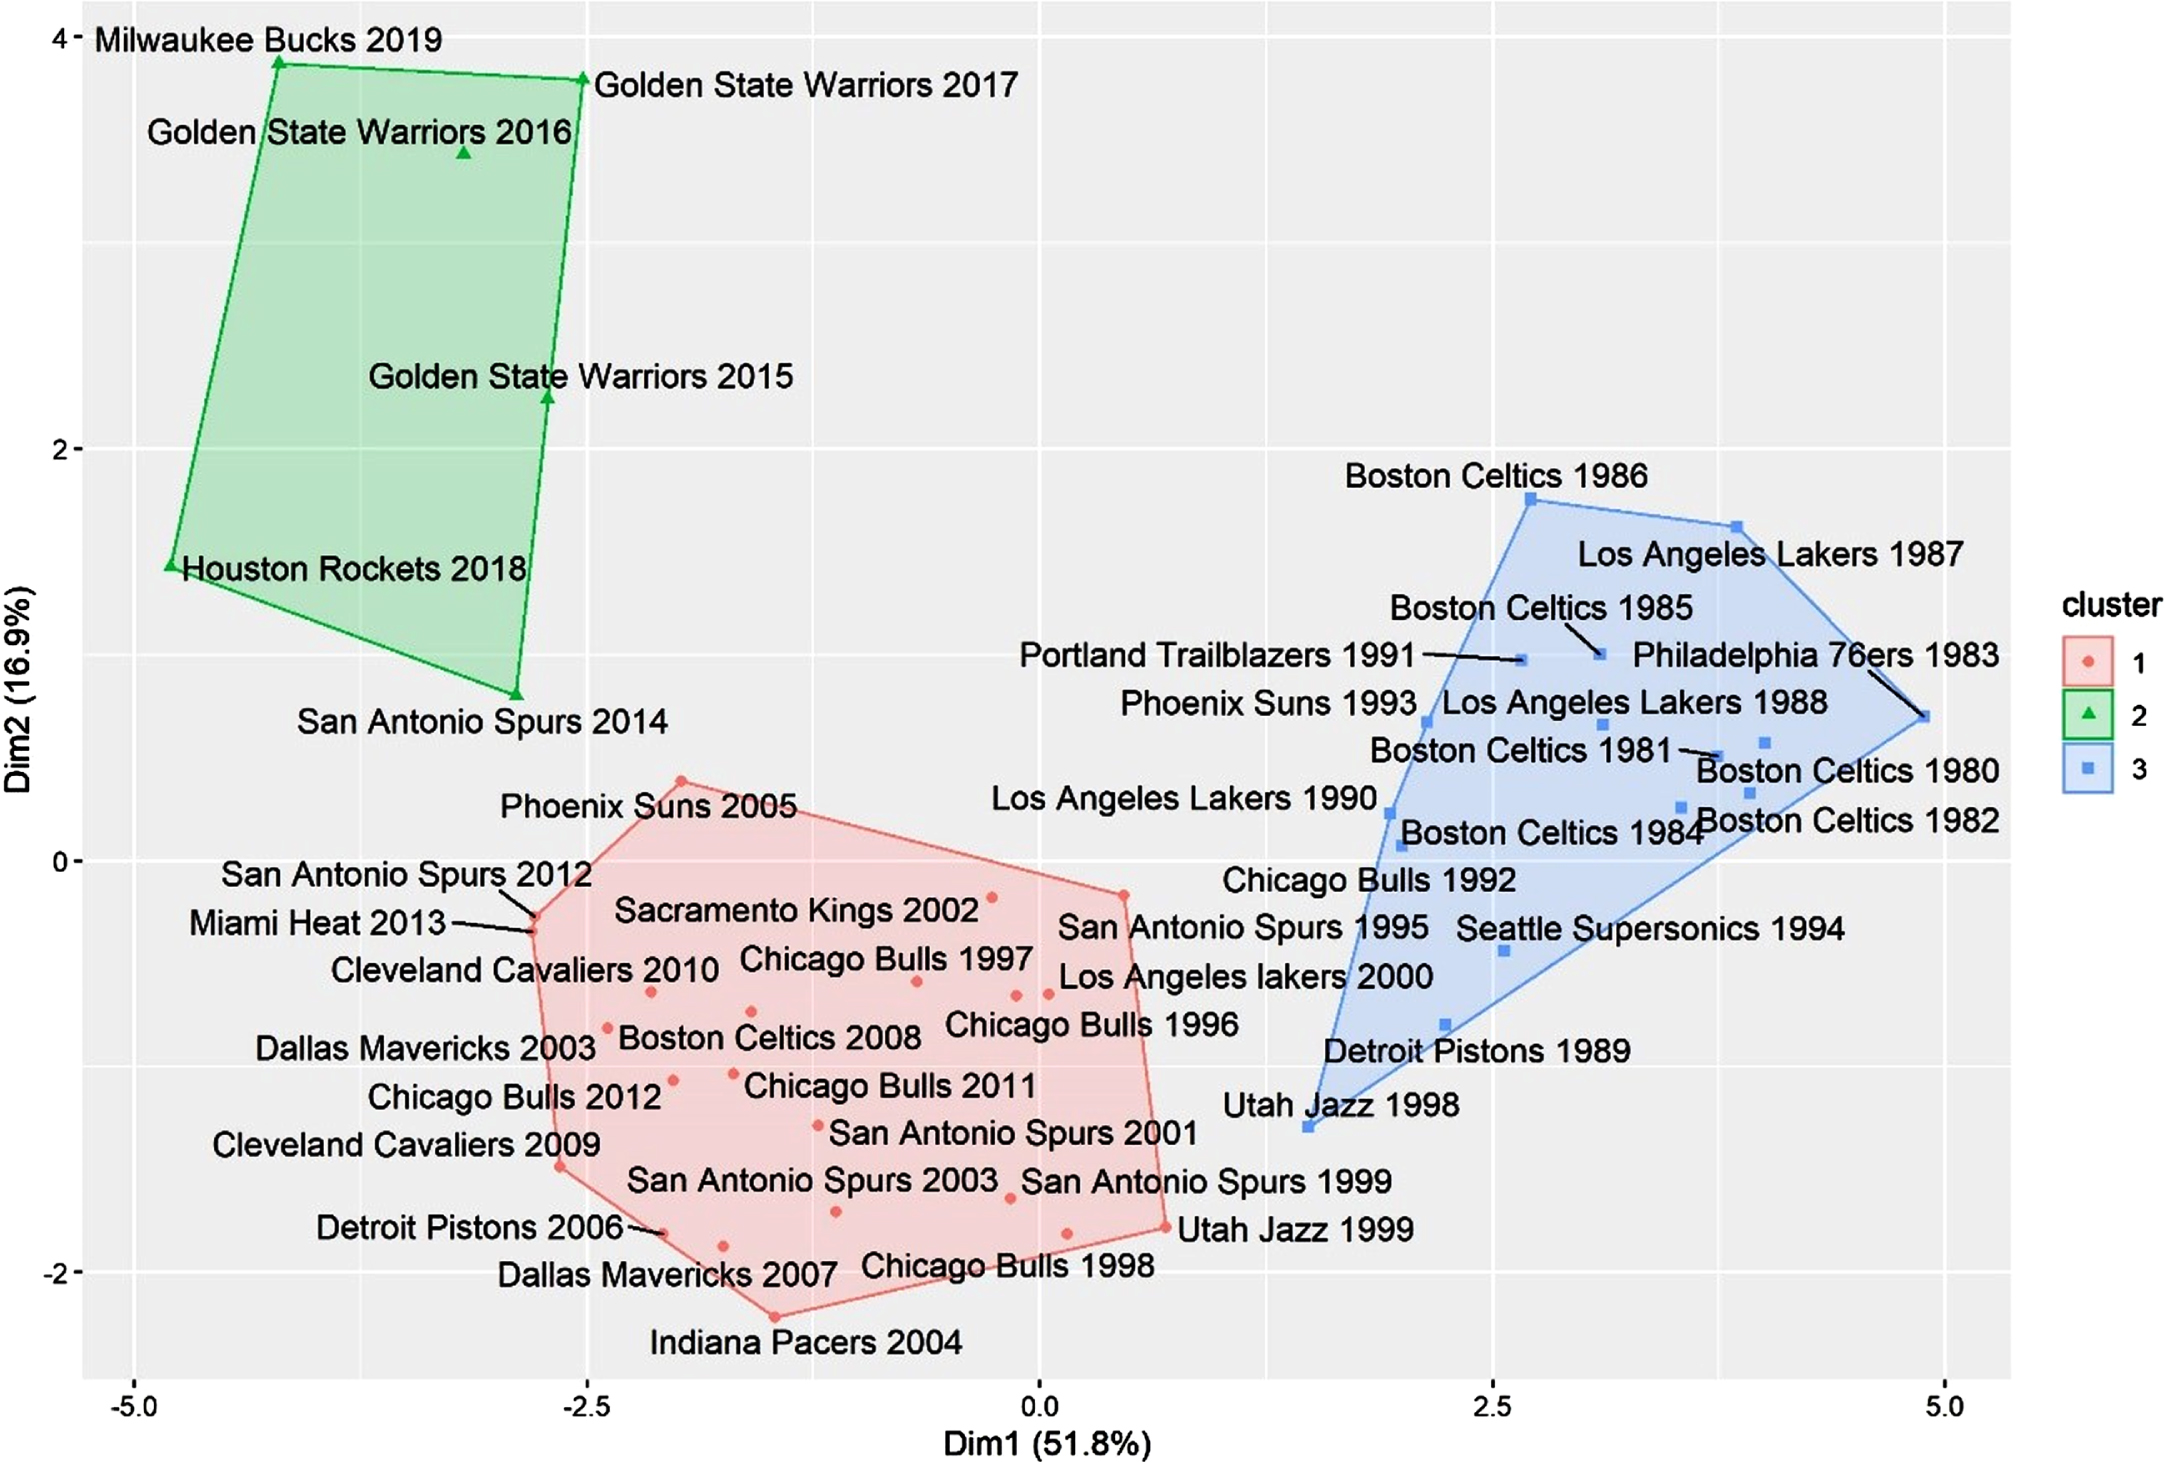 K-means cluster analysis for all winning teams, from 1980 to 2019.